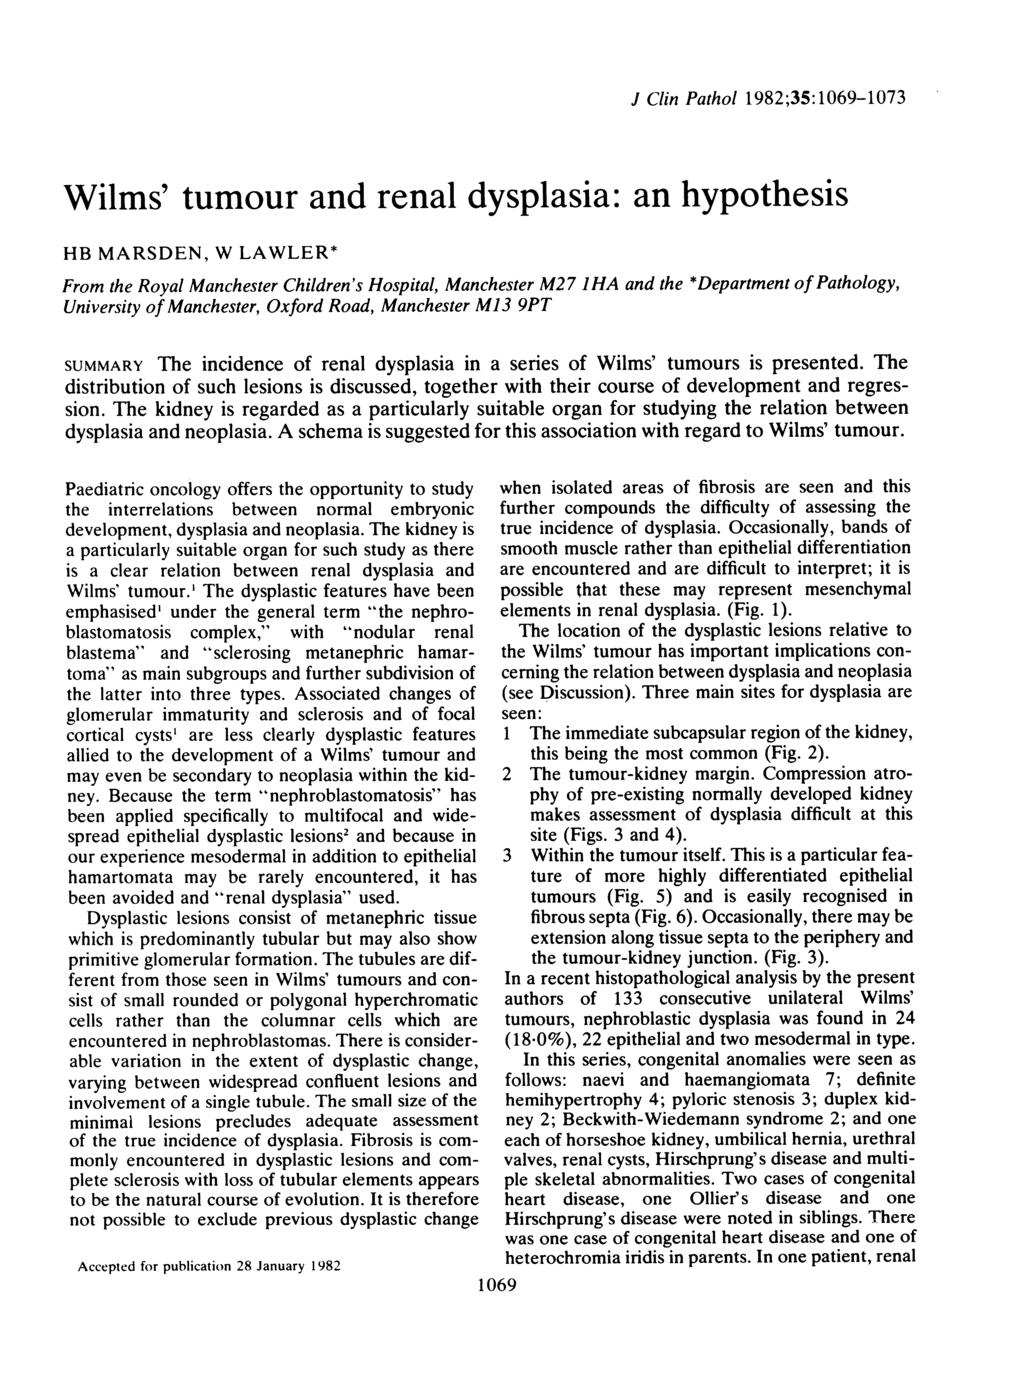 J Clin Pathol 1982;35:1069-1073 Wilms' tumour and renal dysplasia: an hypothesis HB MARSDEN, W LAWLER* From the Royal Manchester Children's Hospital, Manchester M27 I HA and the *Department of